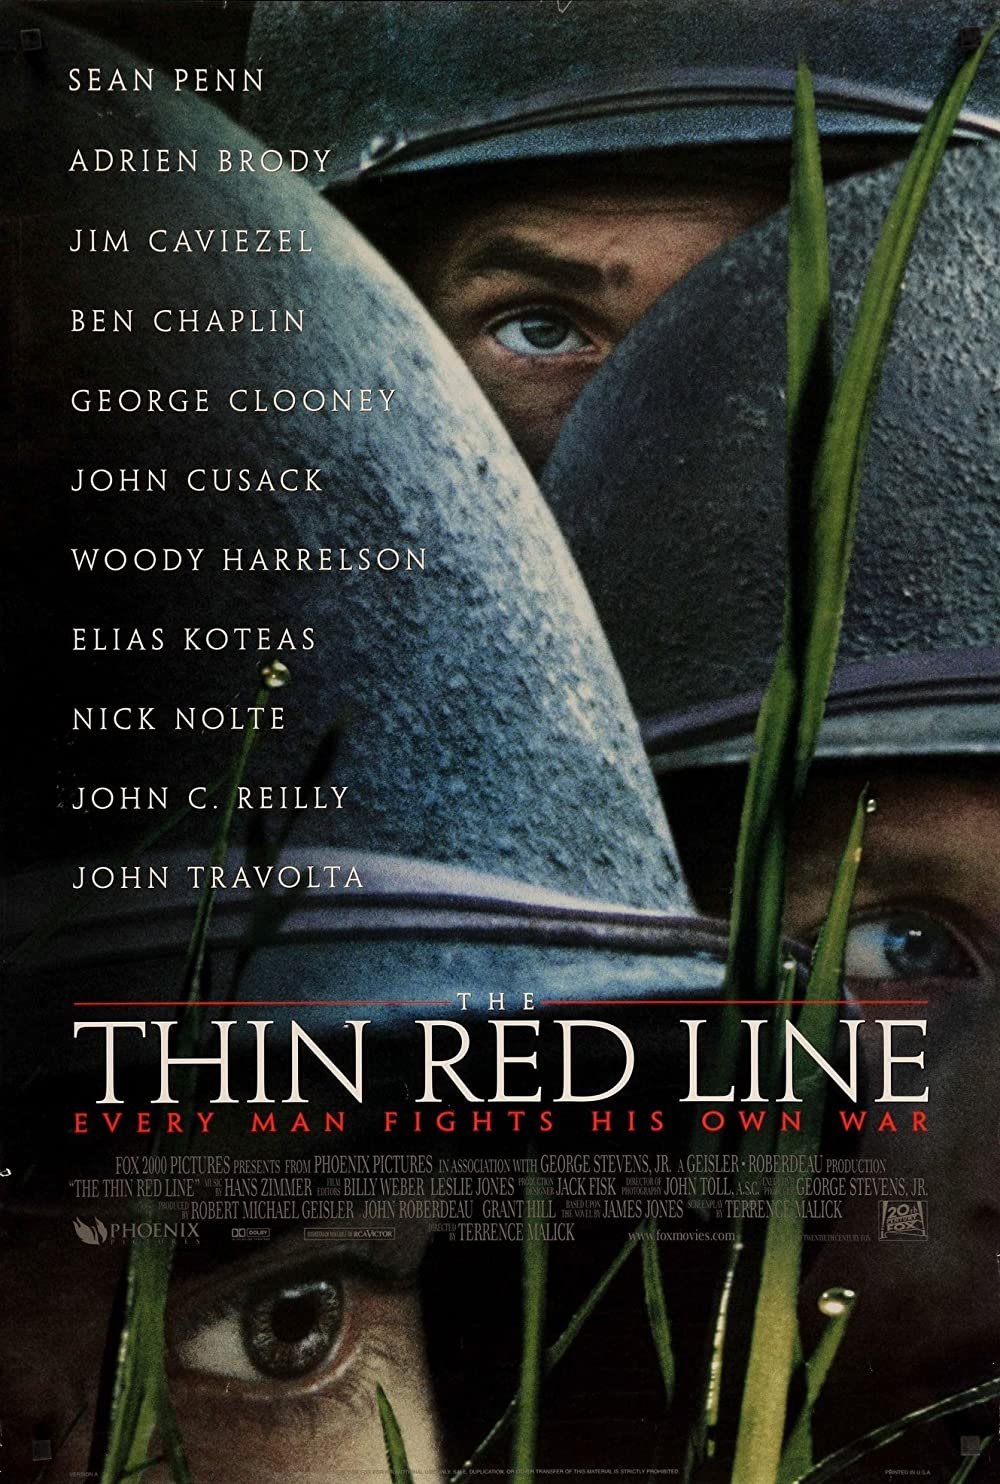 The Thin Red Line image © 20th Century Studios